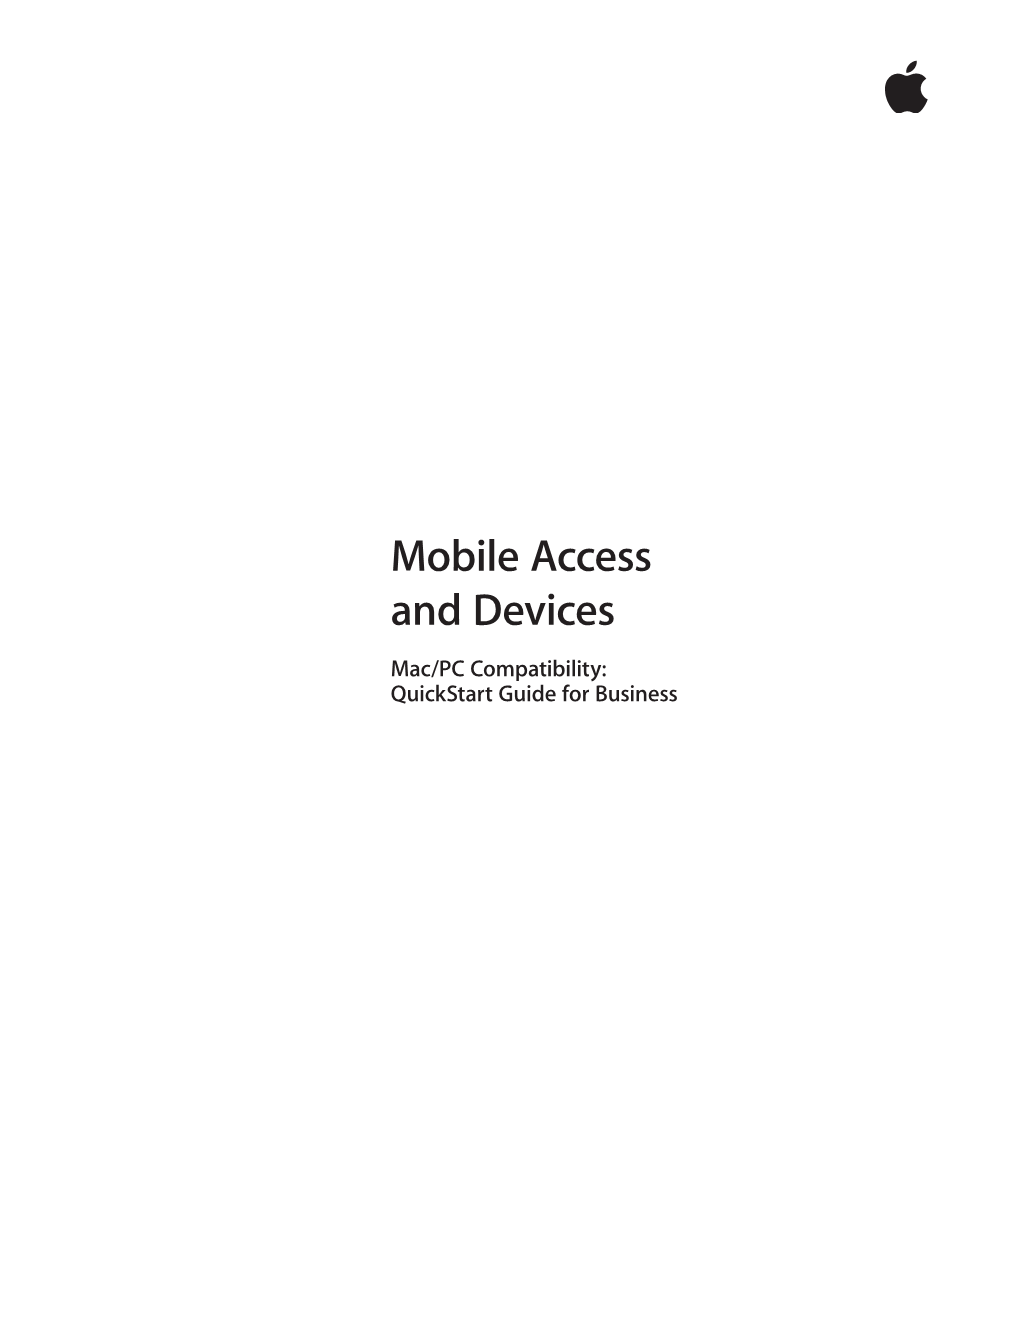 Mobile Access and Devices Mac/PC Compatibility: Quickstart Guide for Business 2